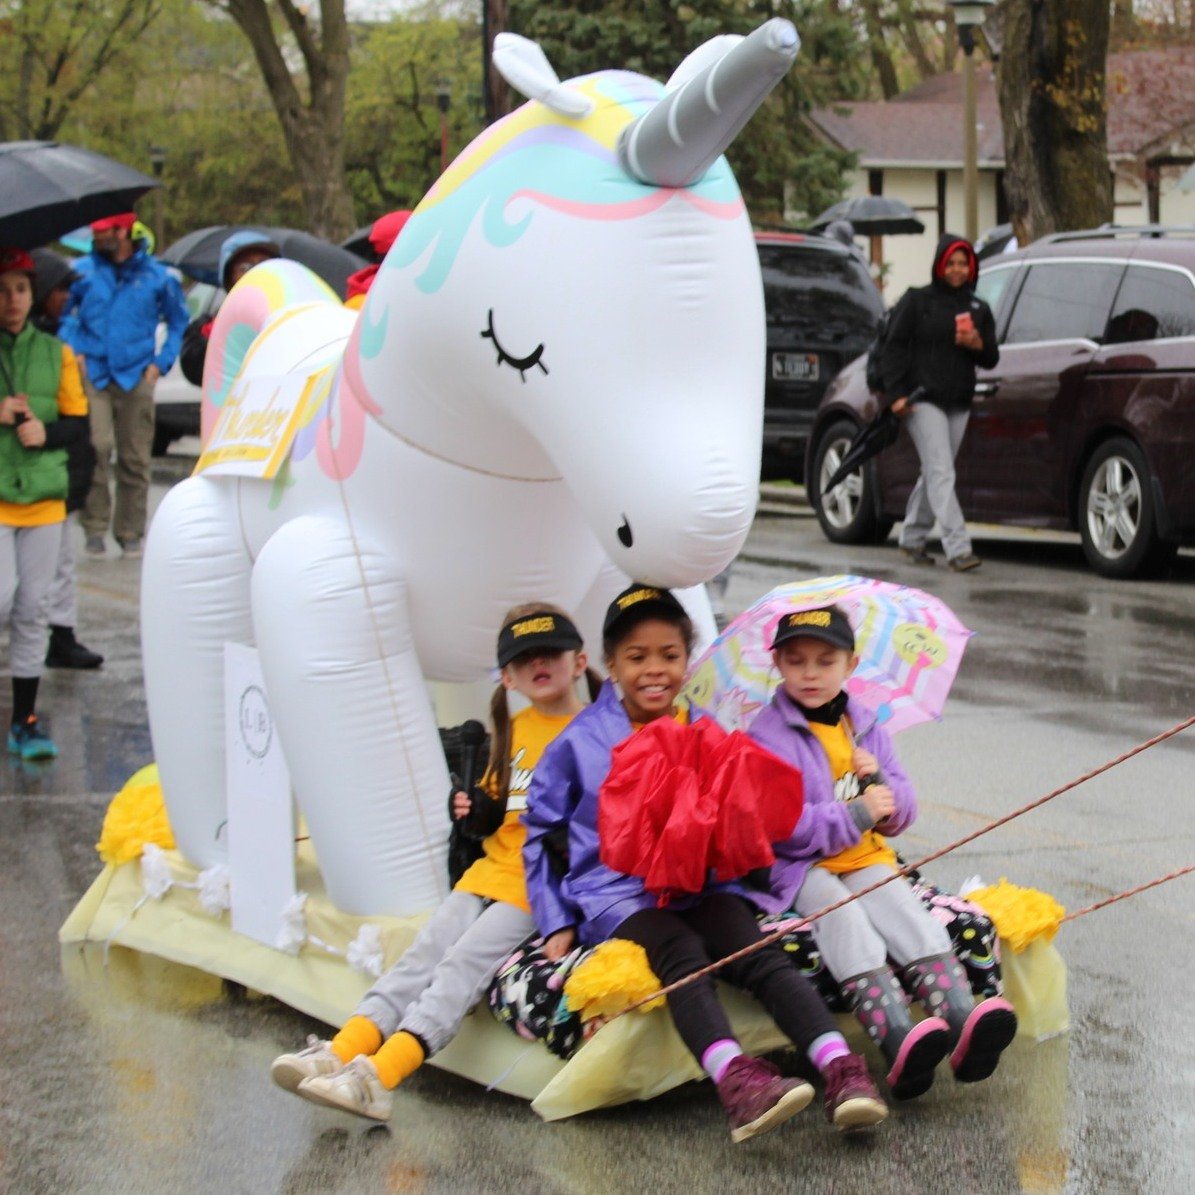 Baseball parades have happened in Flossmoor in rain or shine &mdash; we're are hoping for shine this Saturday, April 20, starting at 9:30 a.m. from Parker Jr. High heading east on Flossmoor Road into Flossmoor Park. Come out and enjoy the parade and 